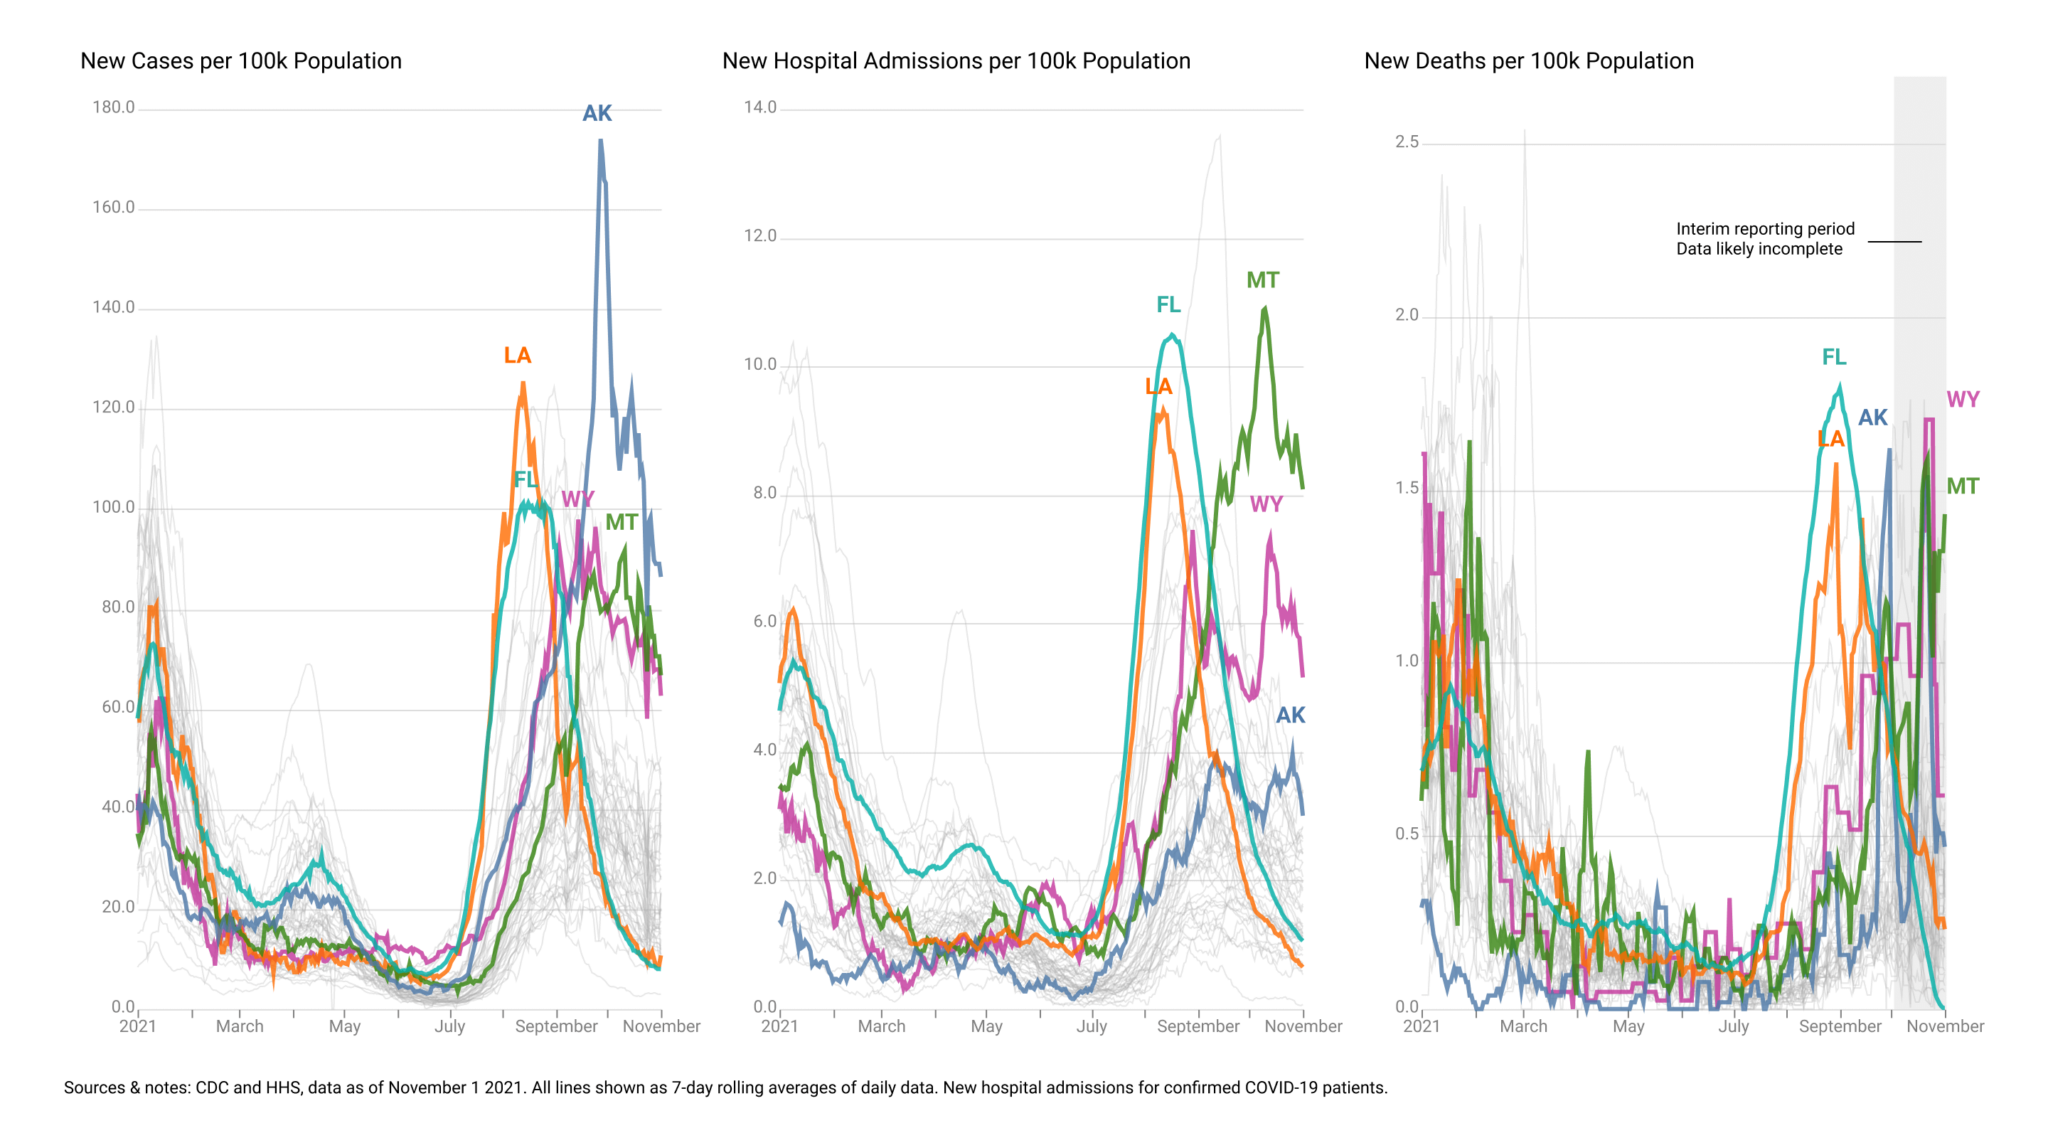 Timeseries line charts spanning Jan to Nov 2021 of US states showing new cases per 100k, new hospital admissions per 100k, new deaths per 100k.